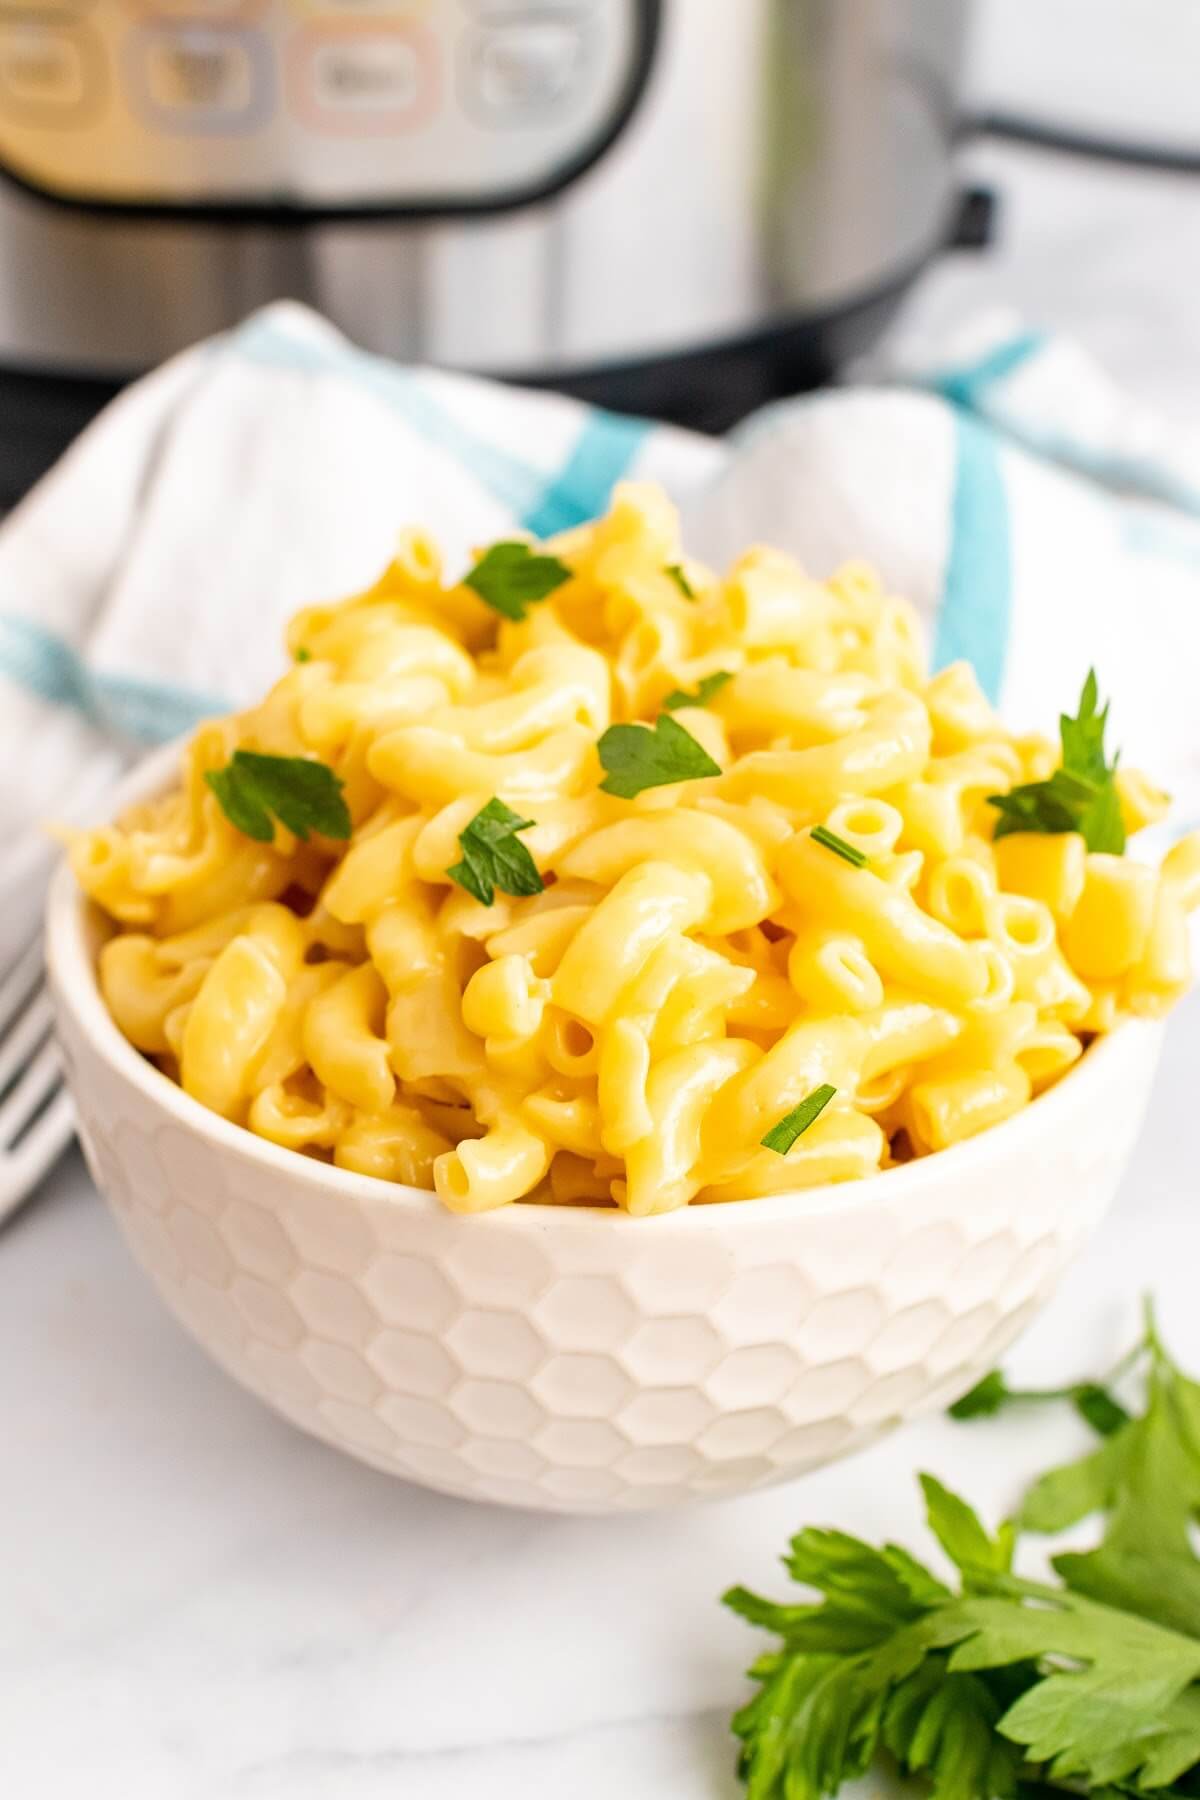 One bowl full of homemade Mac and cheese, garnished with fresh parsley sitting next to a fork, fresh Italian parsley sprigs, a cloth kitchen towel and an Instant Pot.